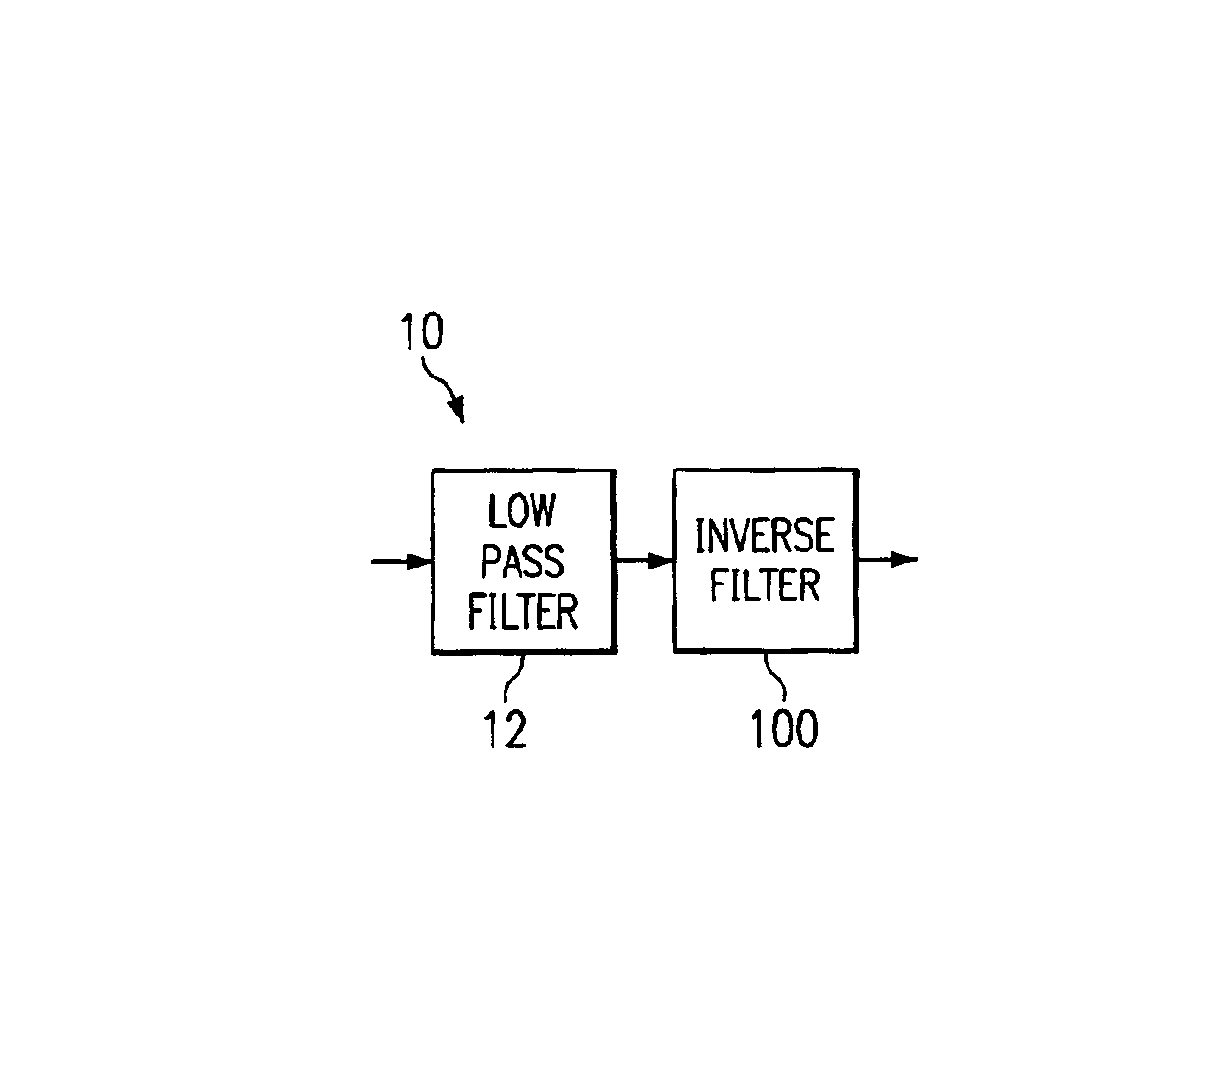 Compensation scheme for reducing delay in a digital impedance matching circuit to improve return loss